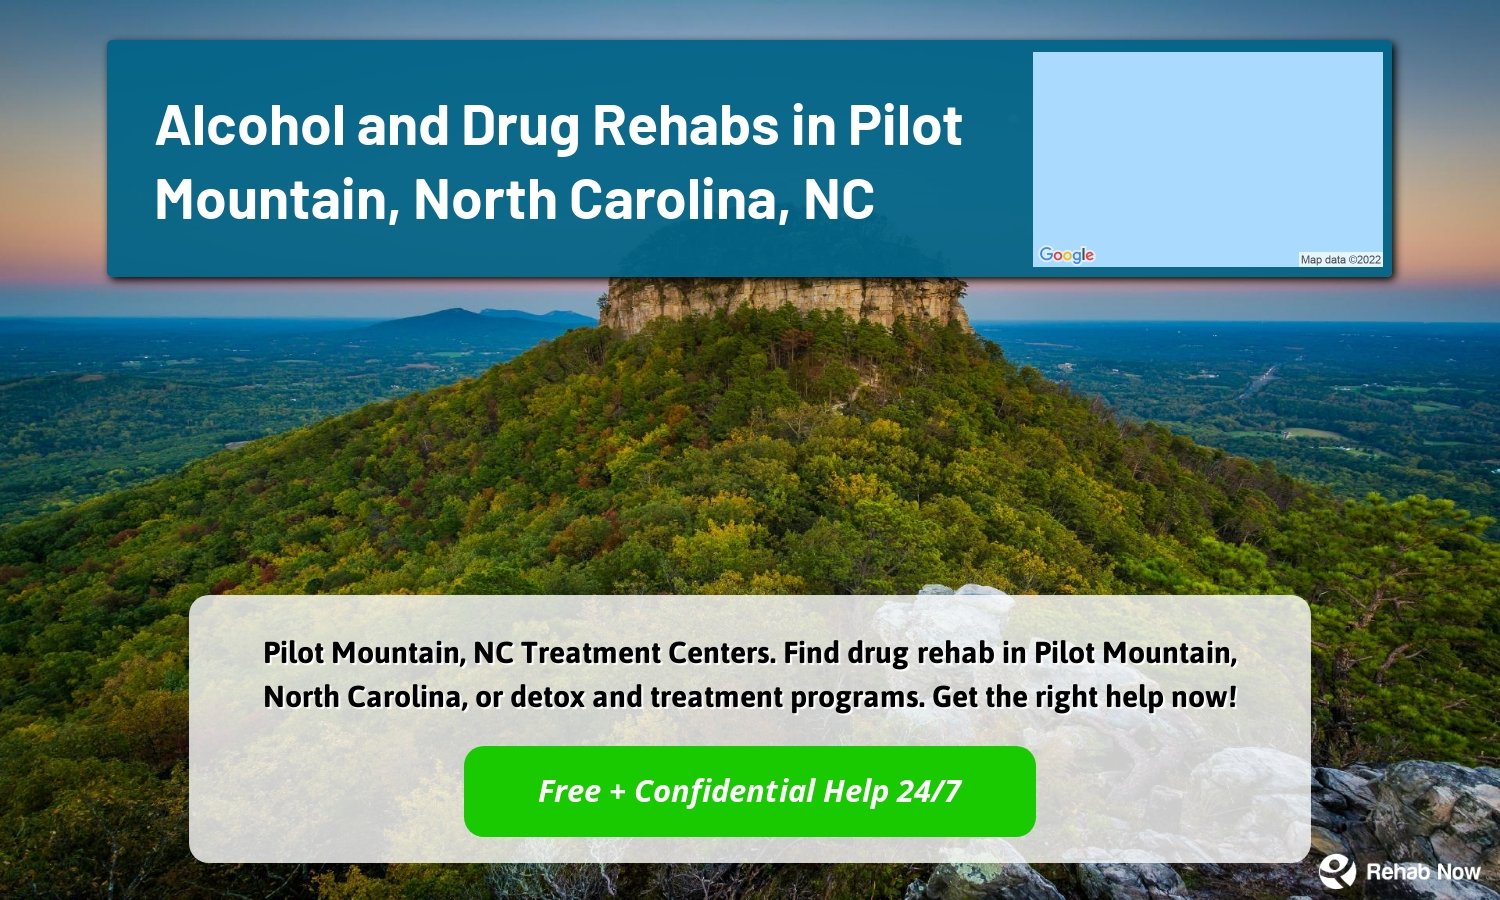 Pilot Mountain, NC Treatment Centers. Find drug rehab in Pilot Mountain, North Carolina, or detox and treatment programs. Get the right help now!